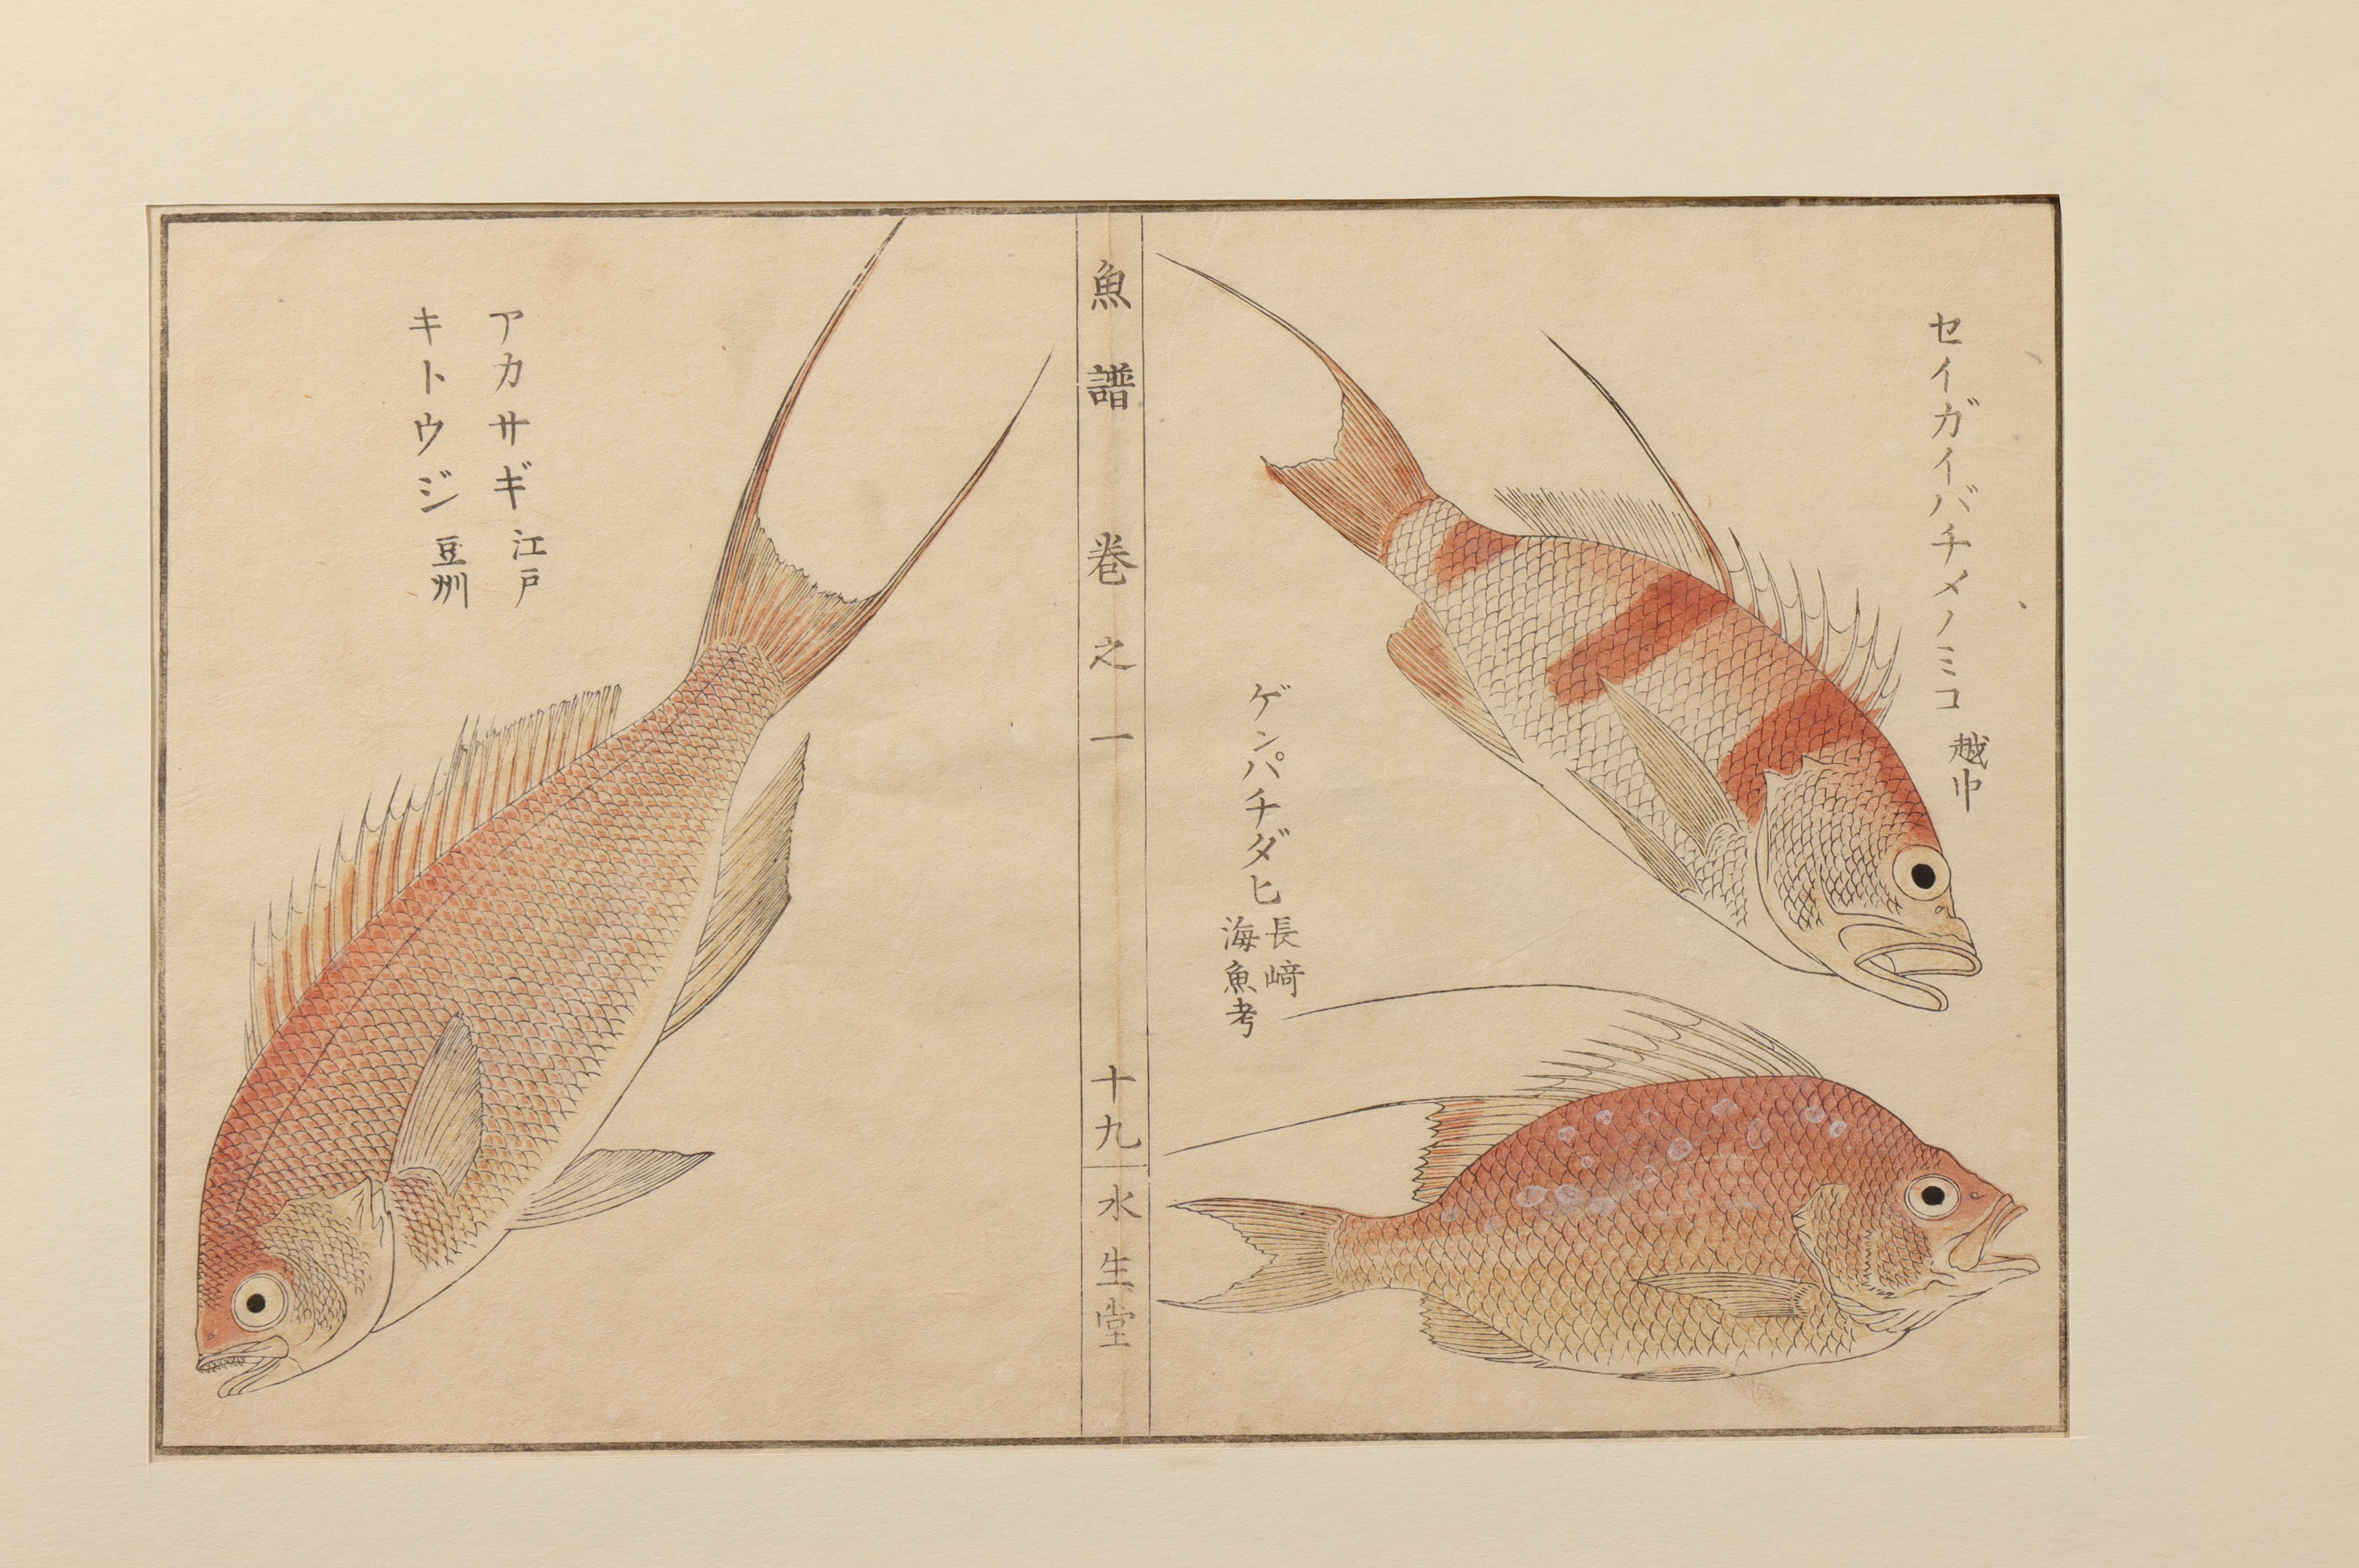 Japan, collection of woodblock prints, 19th century - Image 7 of 9